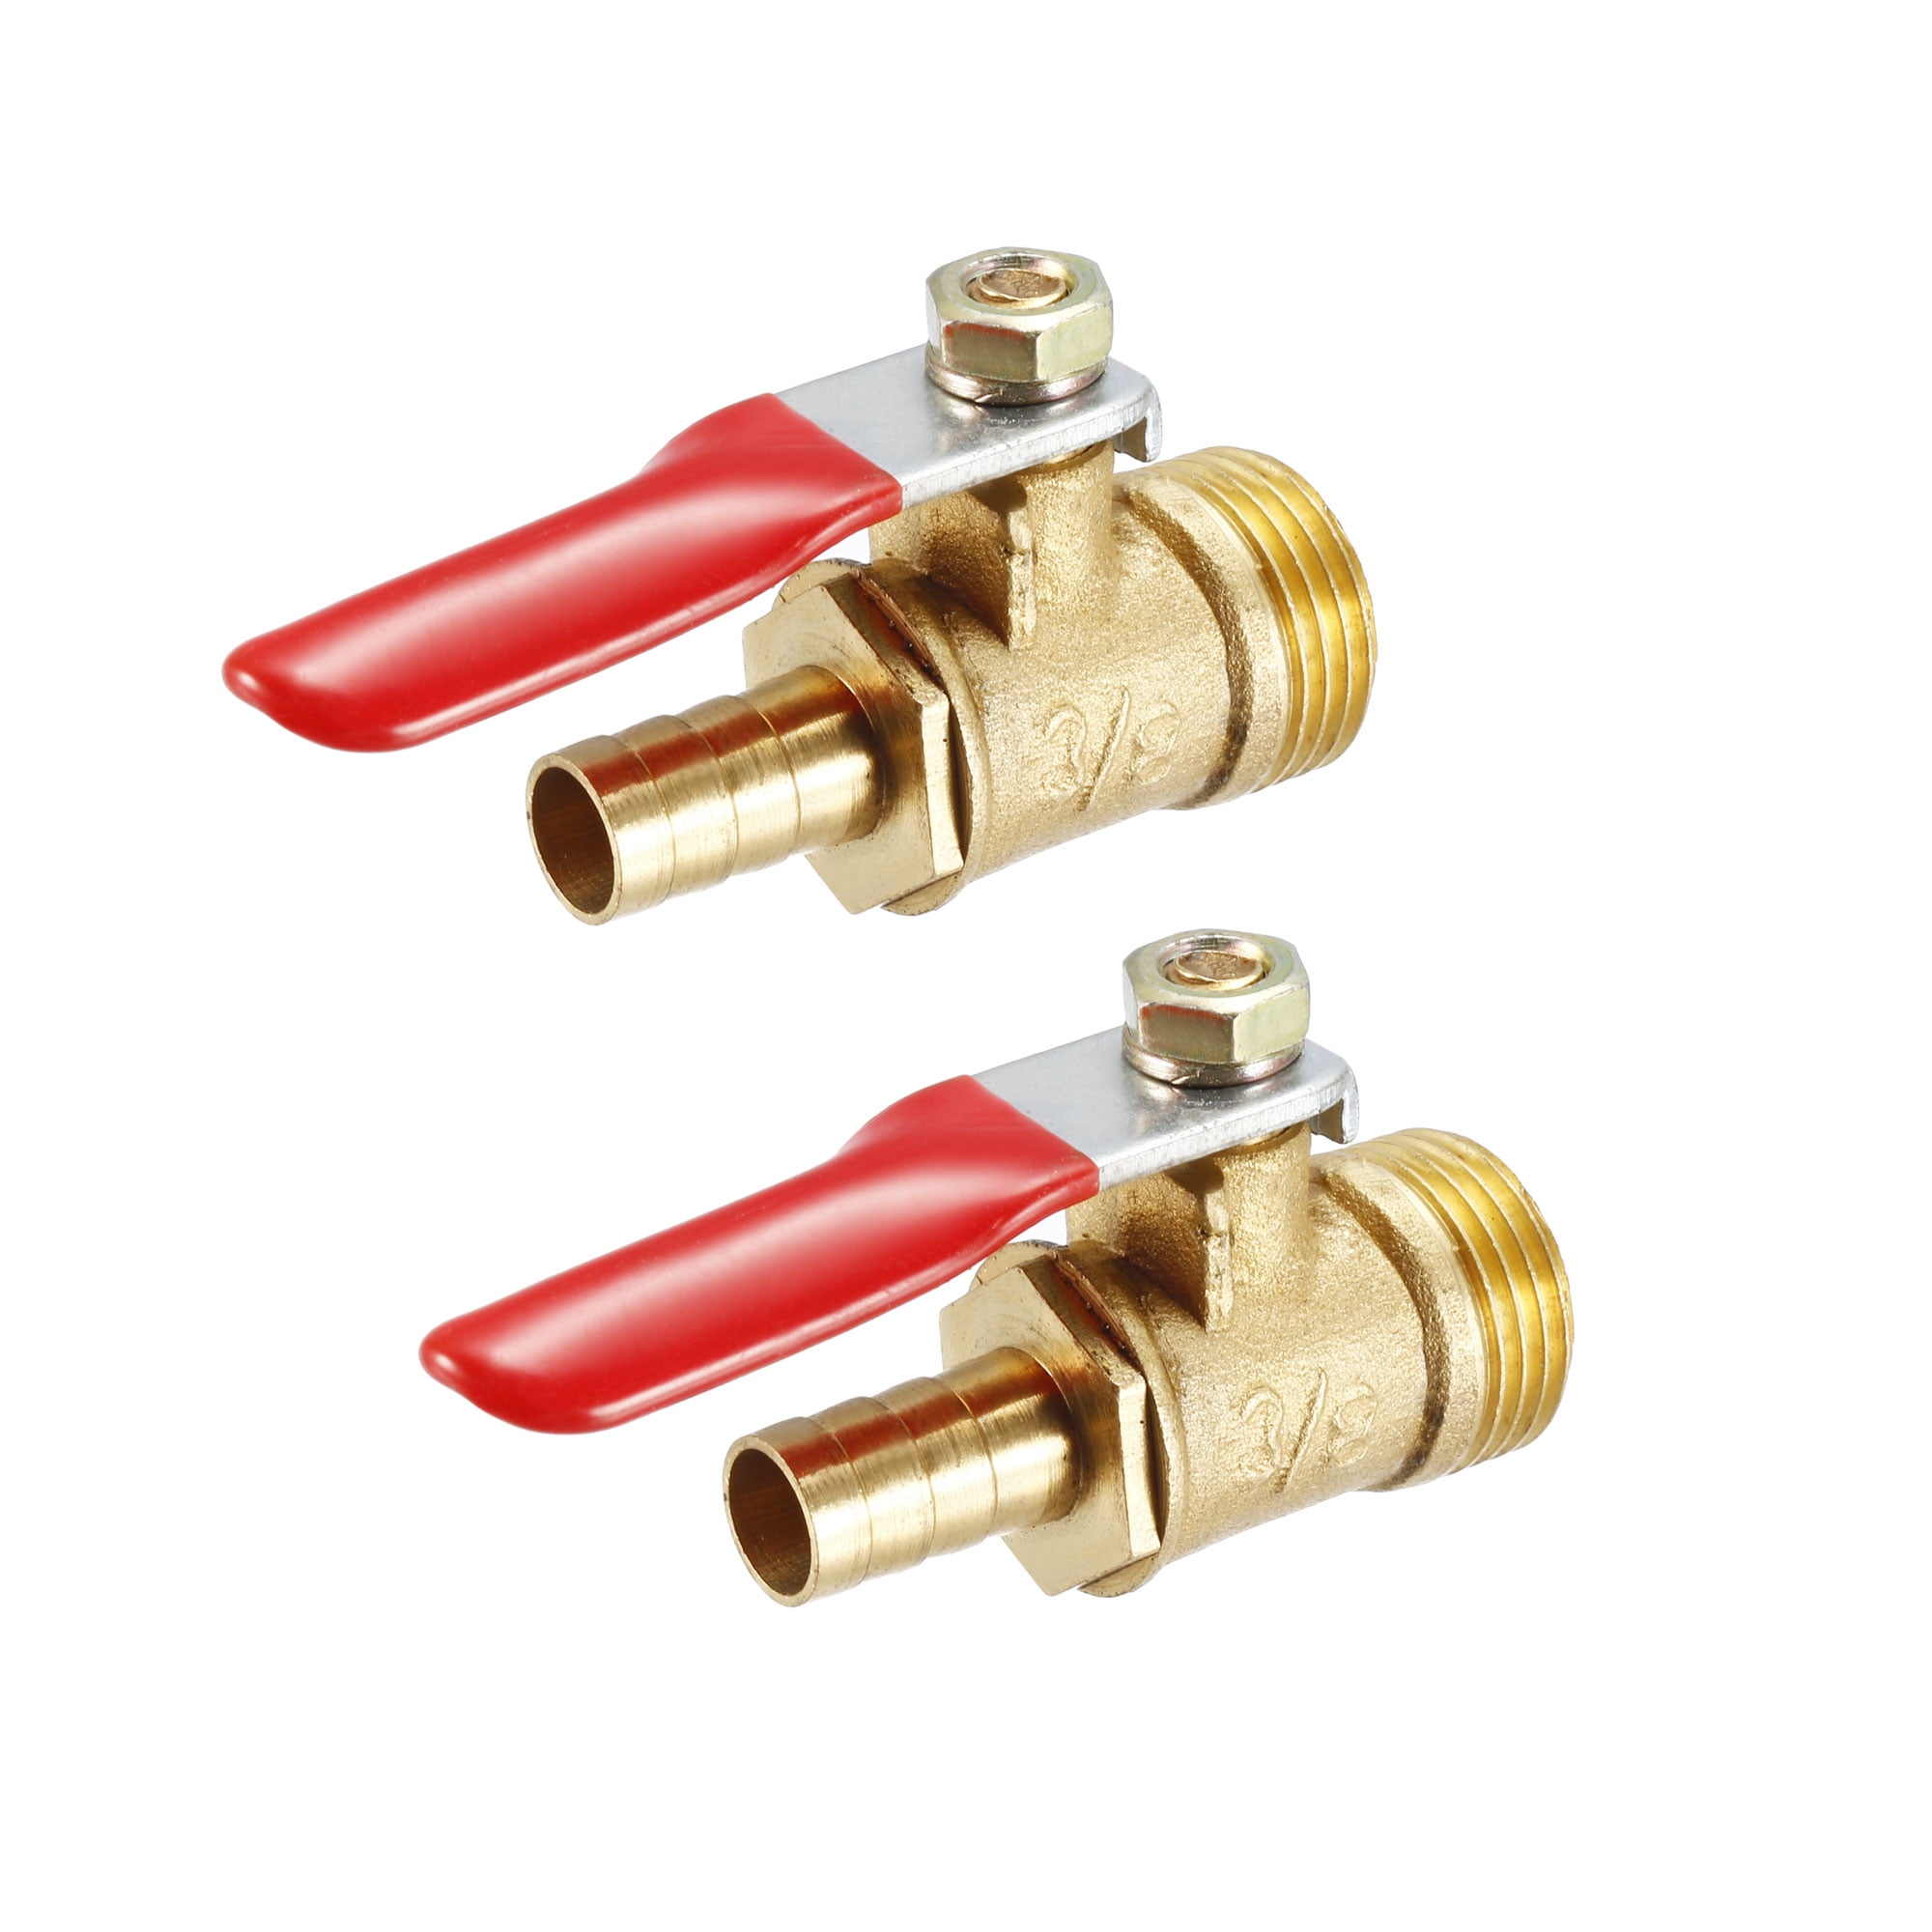 2pcs Brass 5/16 Male to Male Barbed Shut Off Full Switch Valve Gas Air Fuel 